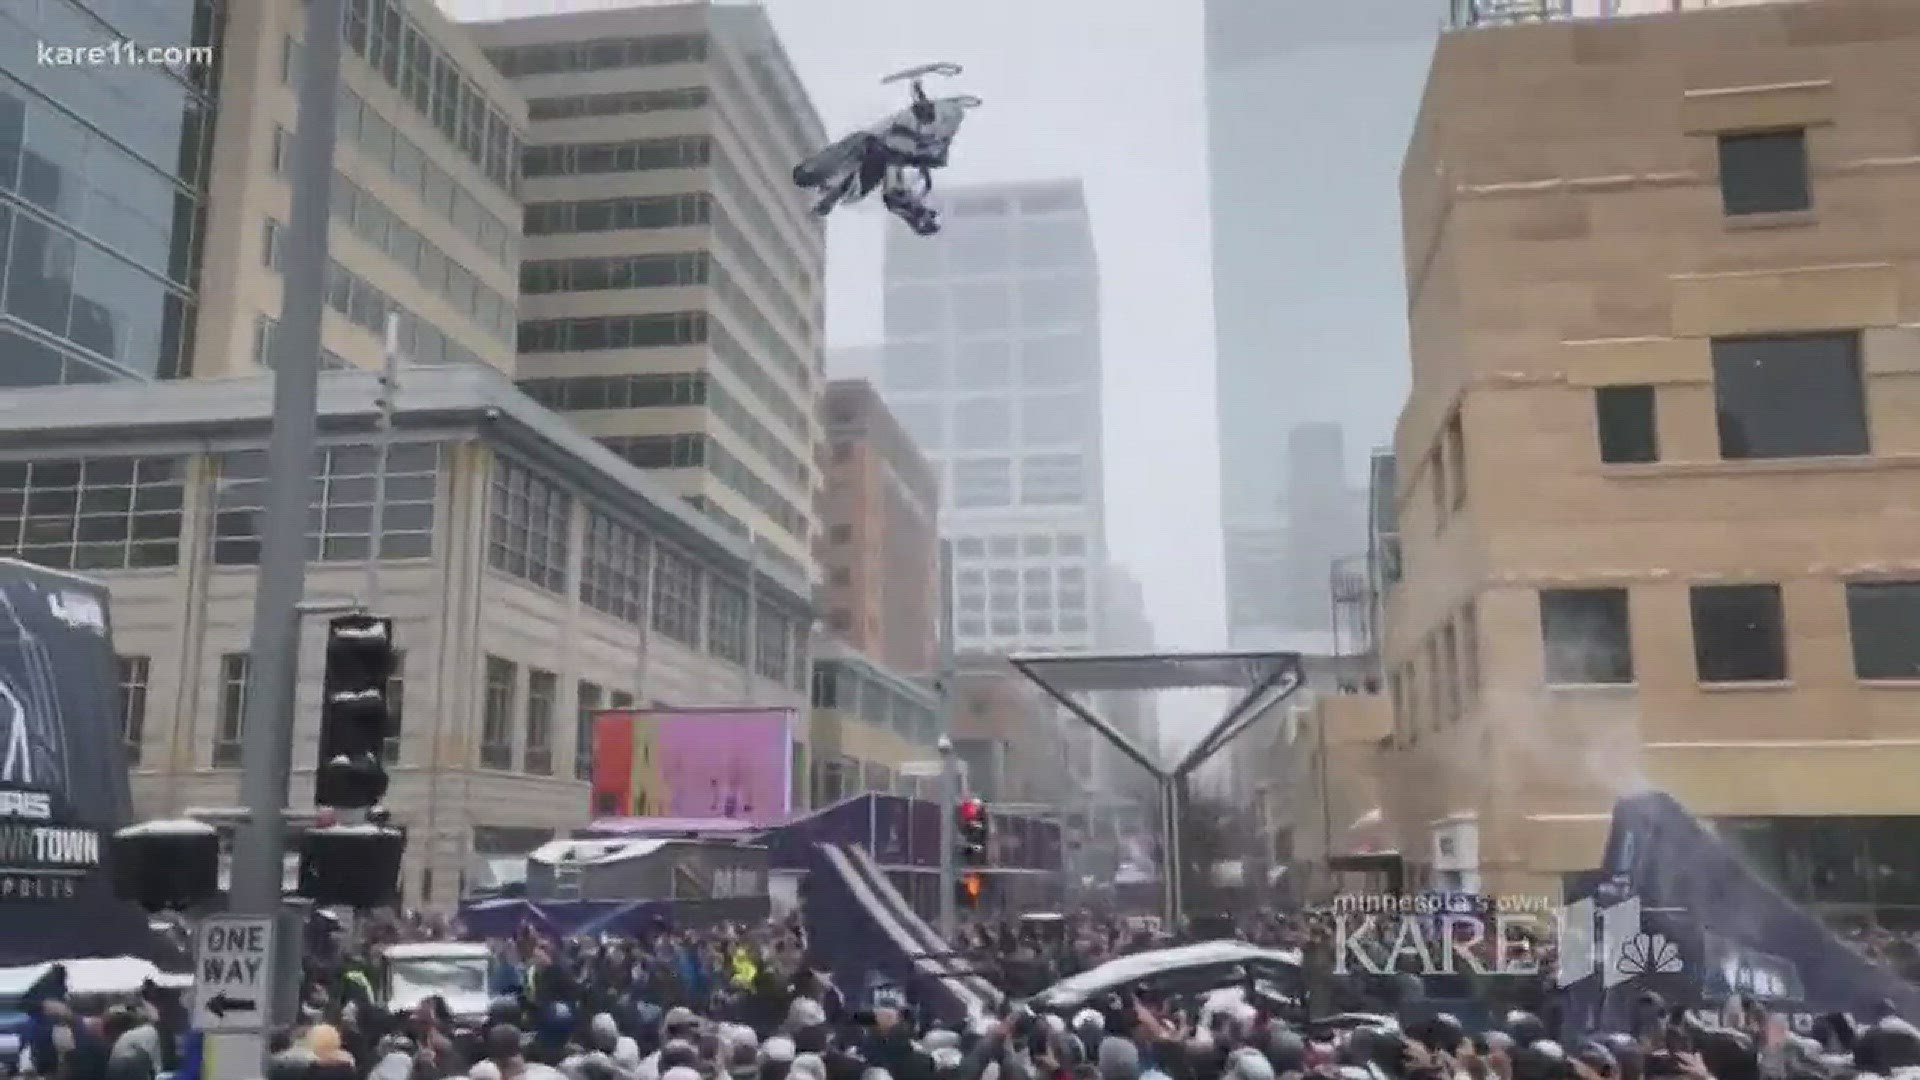 On Saturday afternoon, Daredevil Levi LaVallee pulled off an awesome snowmobile stunt in front of thousands of people down at Super Bowl Live.